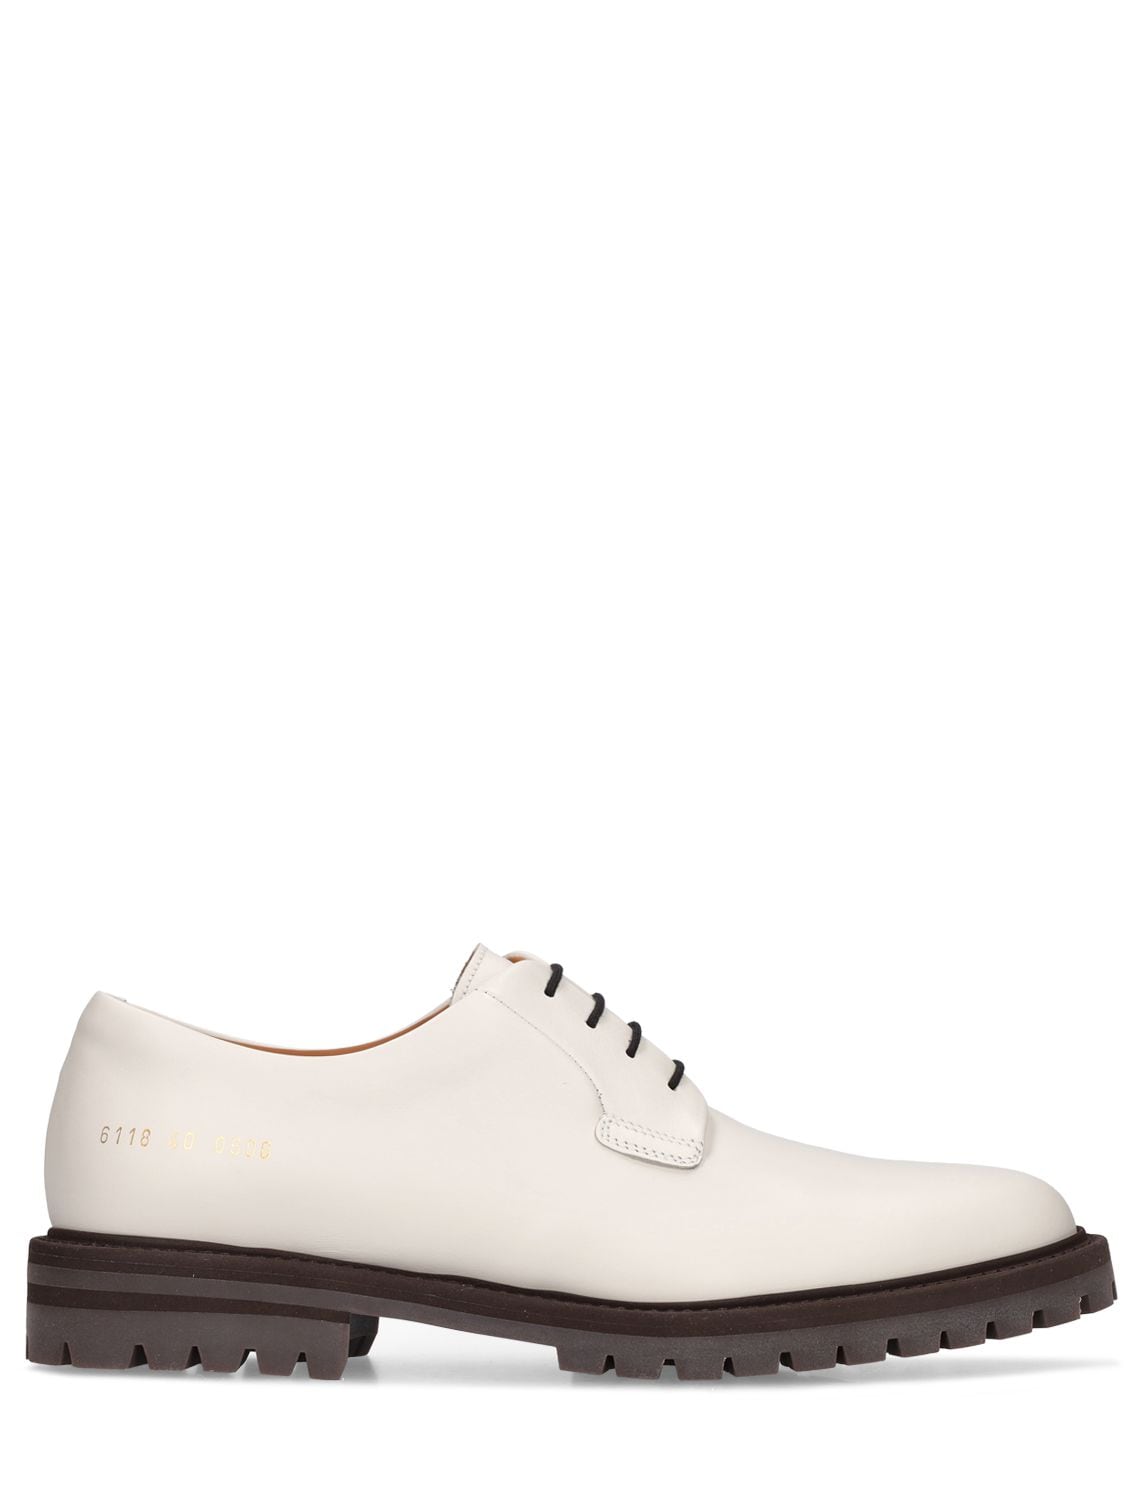 Chaussures Oxford Derby - COMMON PROJECTS - Modalova